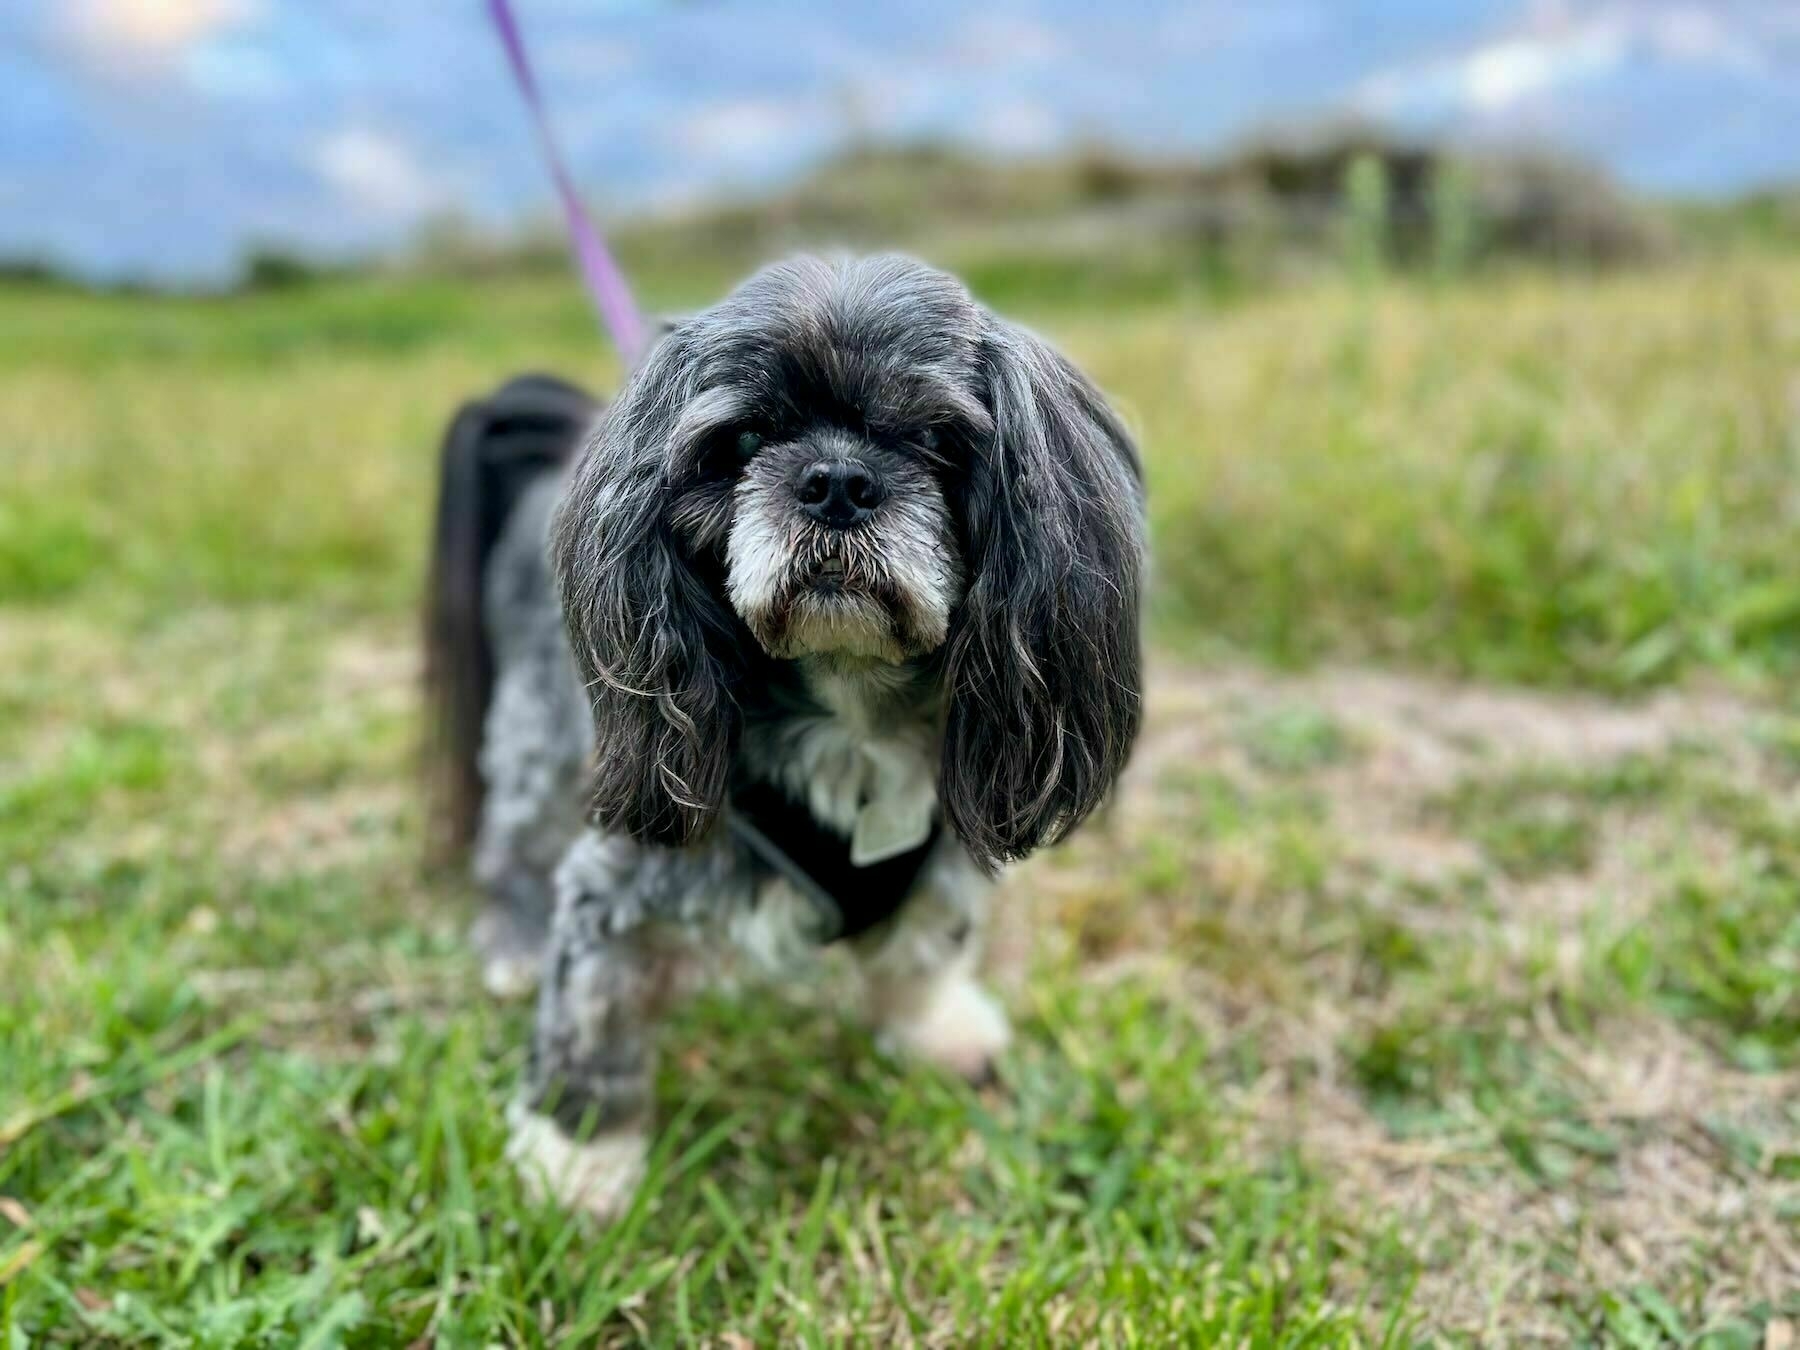 Small black dog, standing on grass, looking at the camera.  